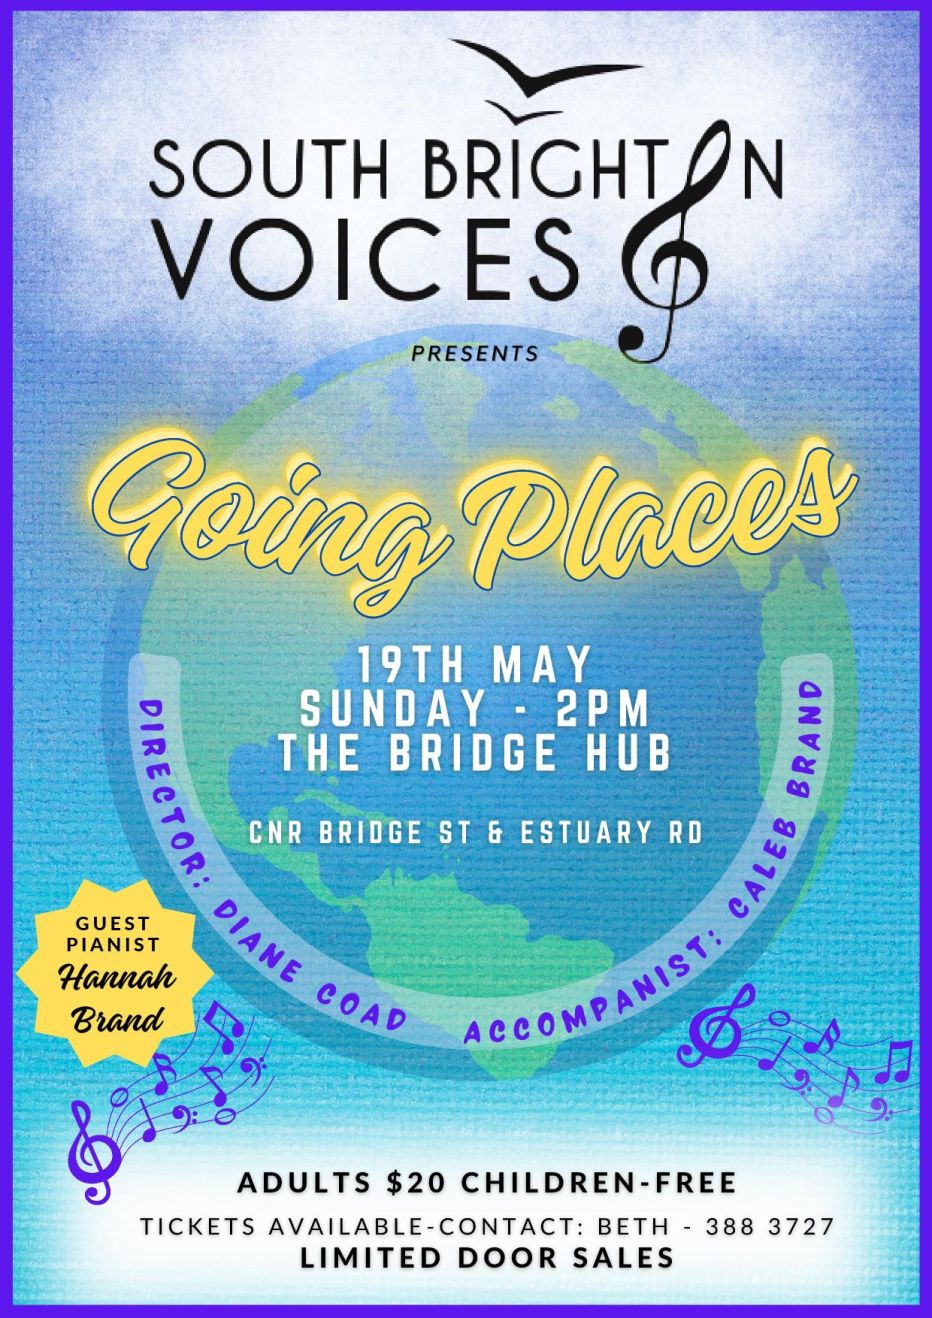 South Brighton Voices: Going Places